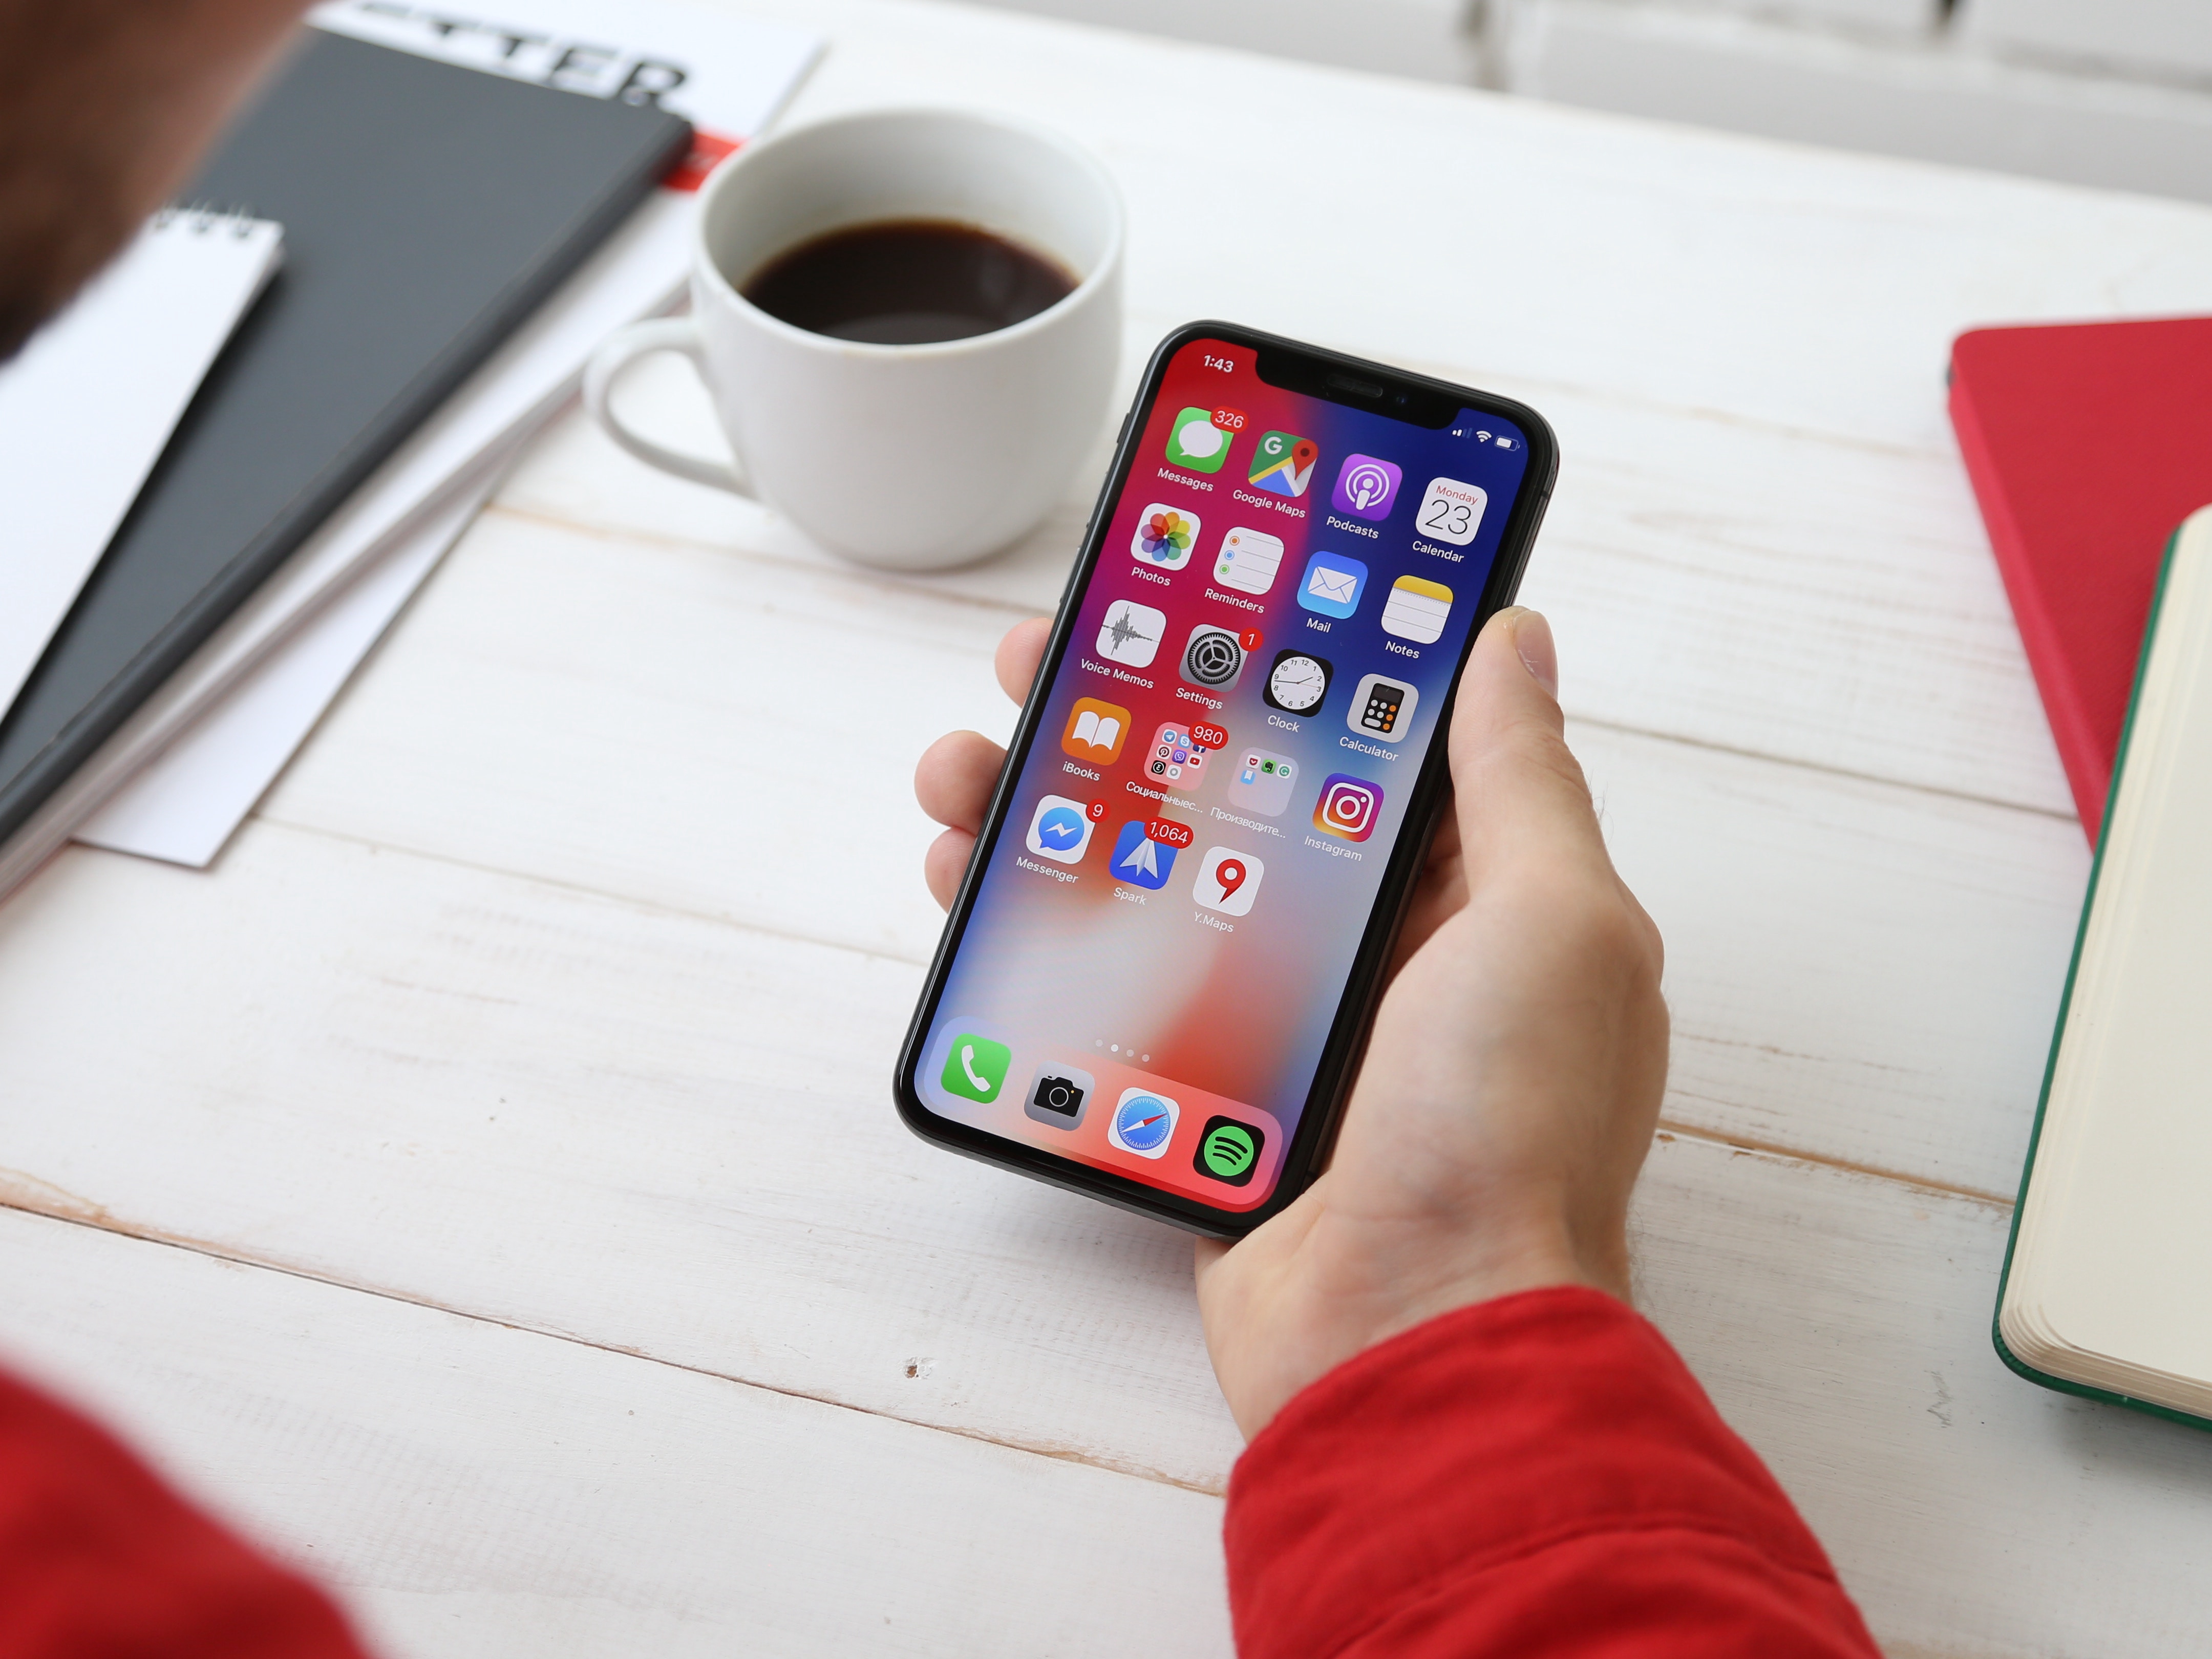 The most downloaded iOS apps of 2018